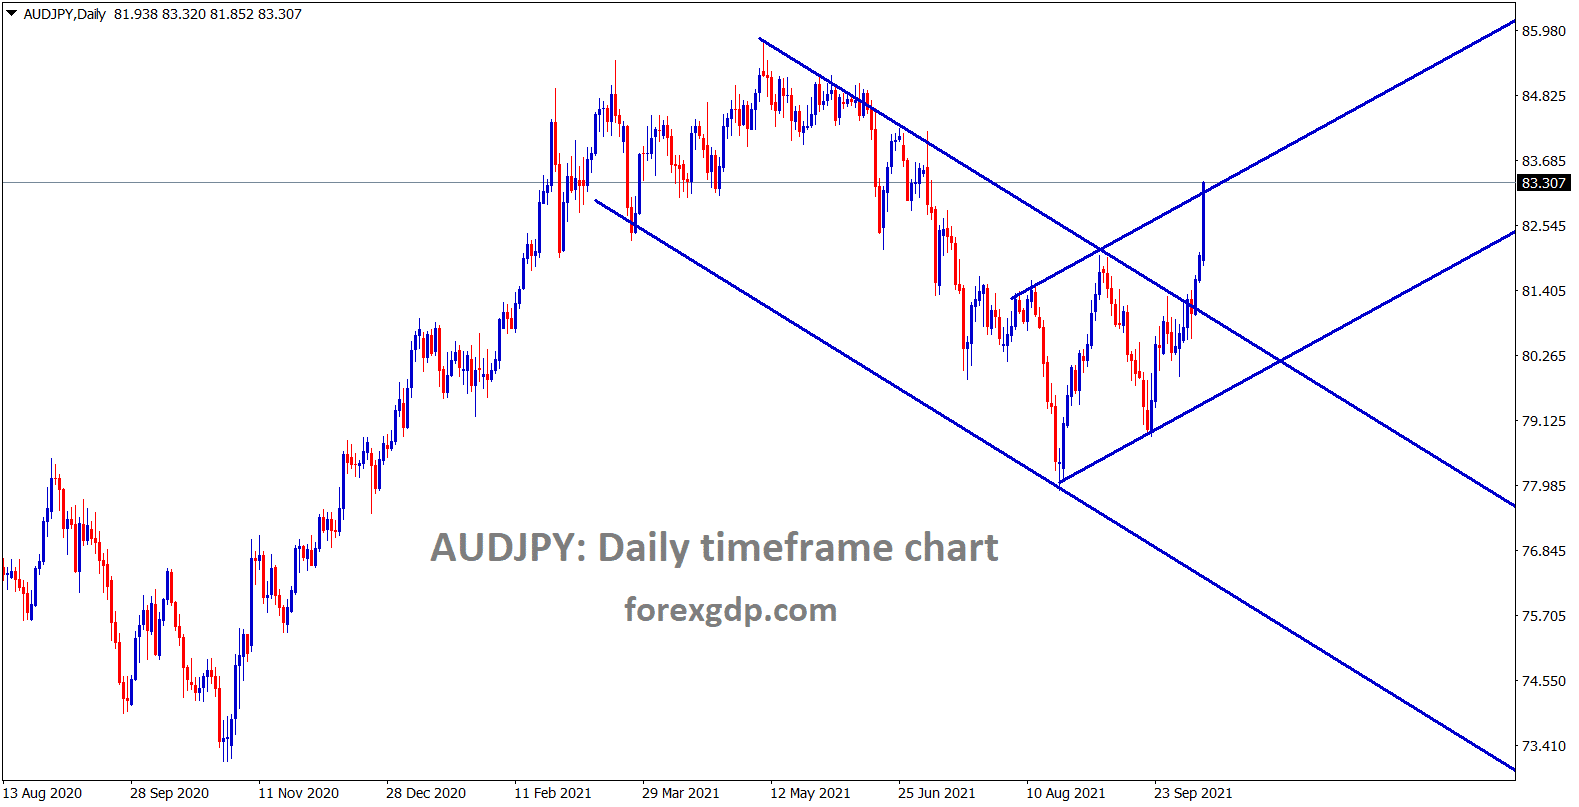 AUDJPY is moving in a strong uptrend